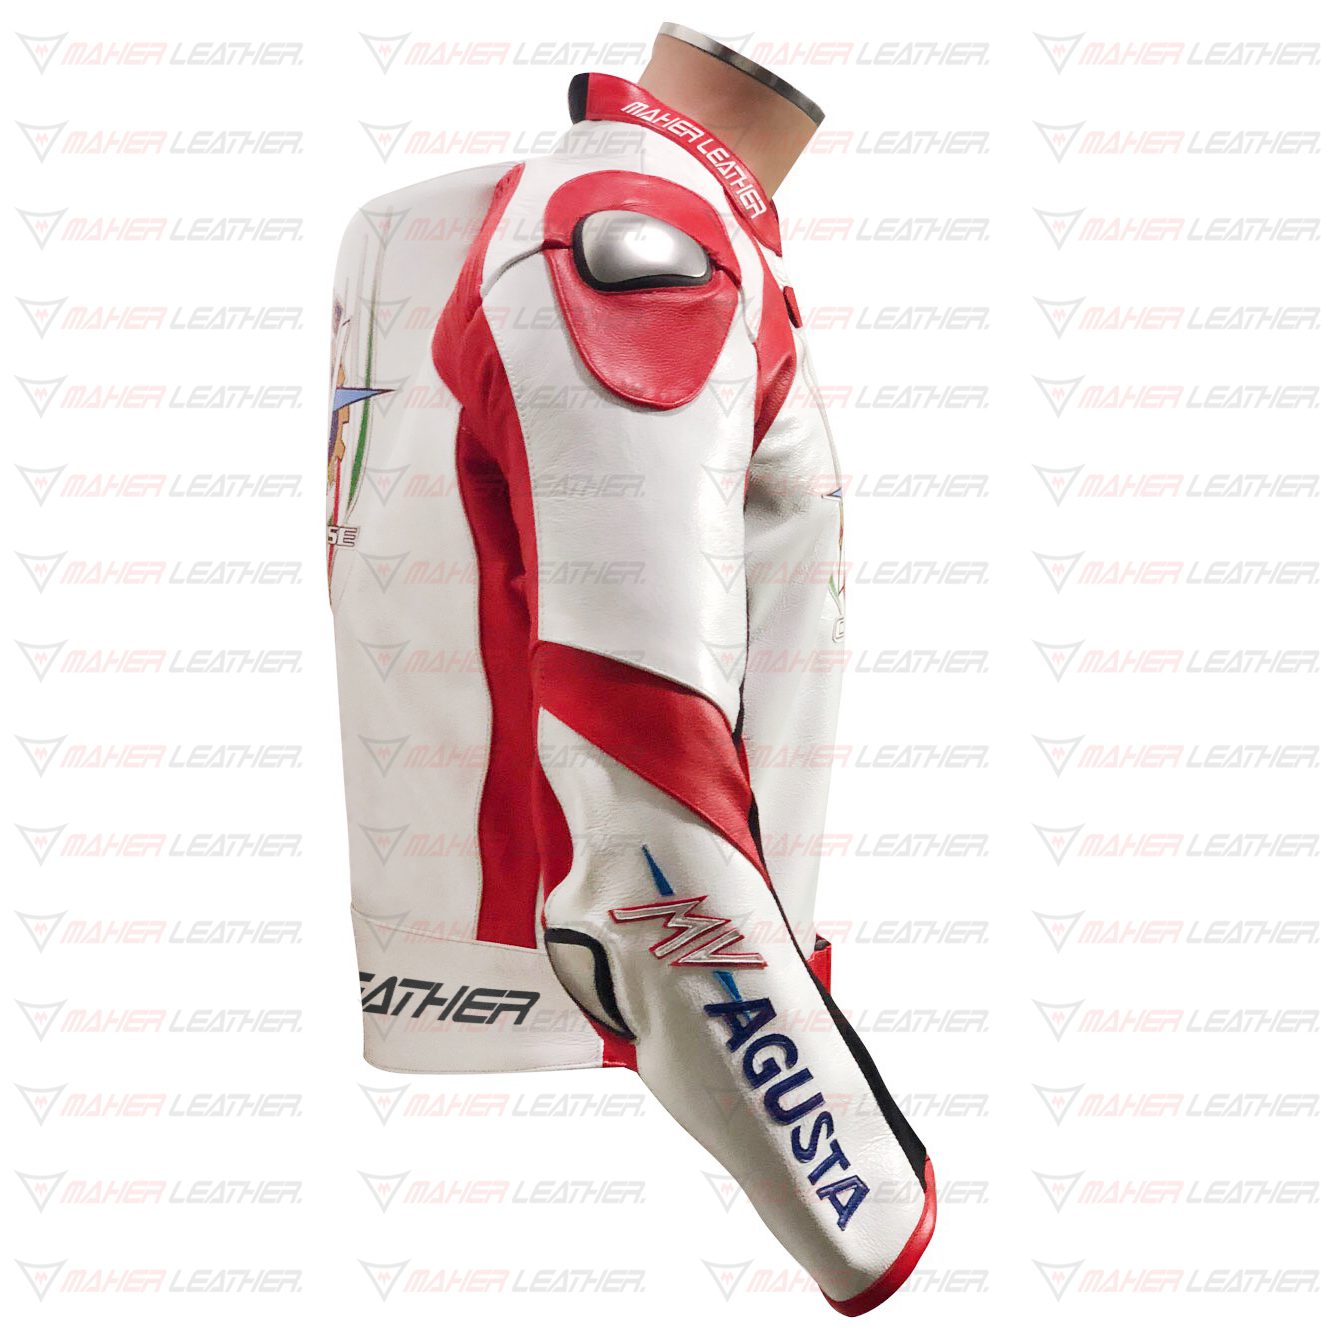 Right arm and shoulder protector of mv agusta motorcycle jacket